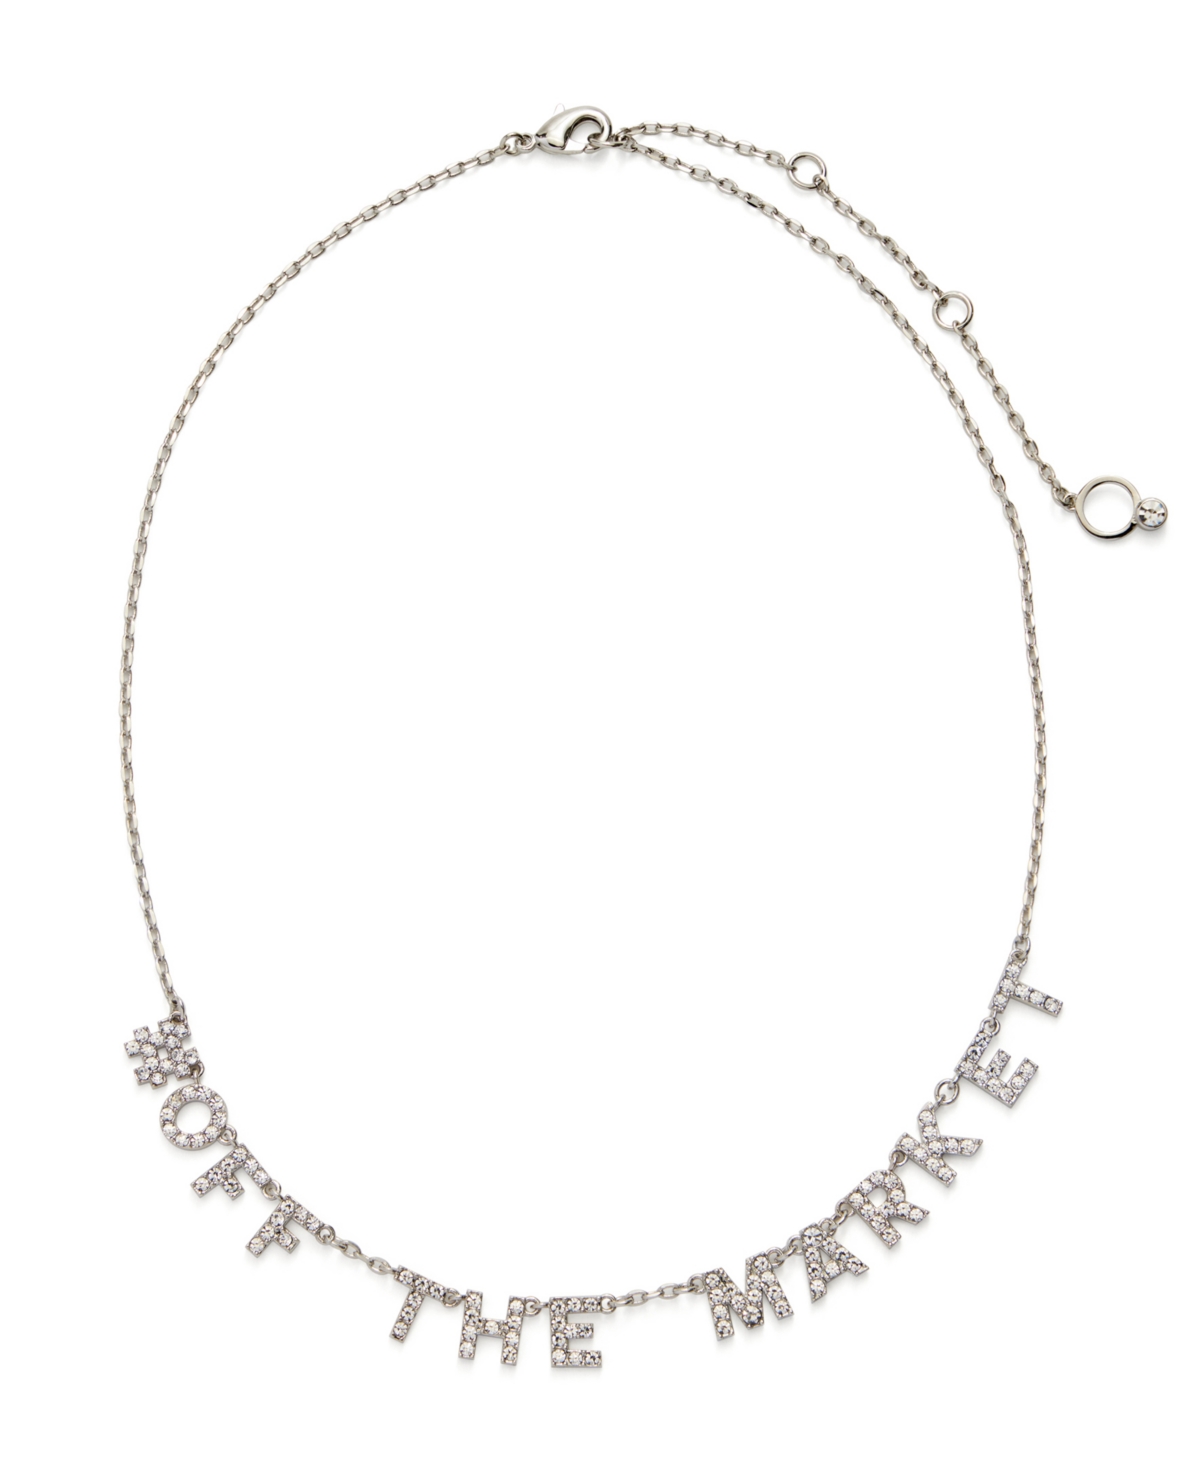 Faux Stone Pave Off The Market Bib Necklace - Crystal, Rhodium